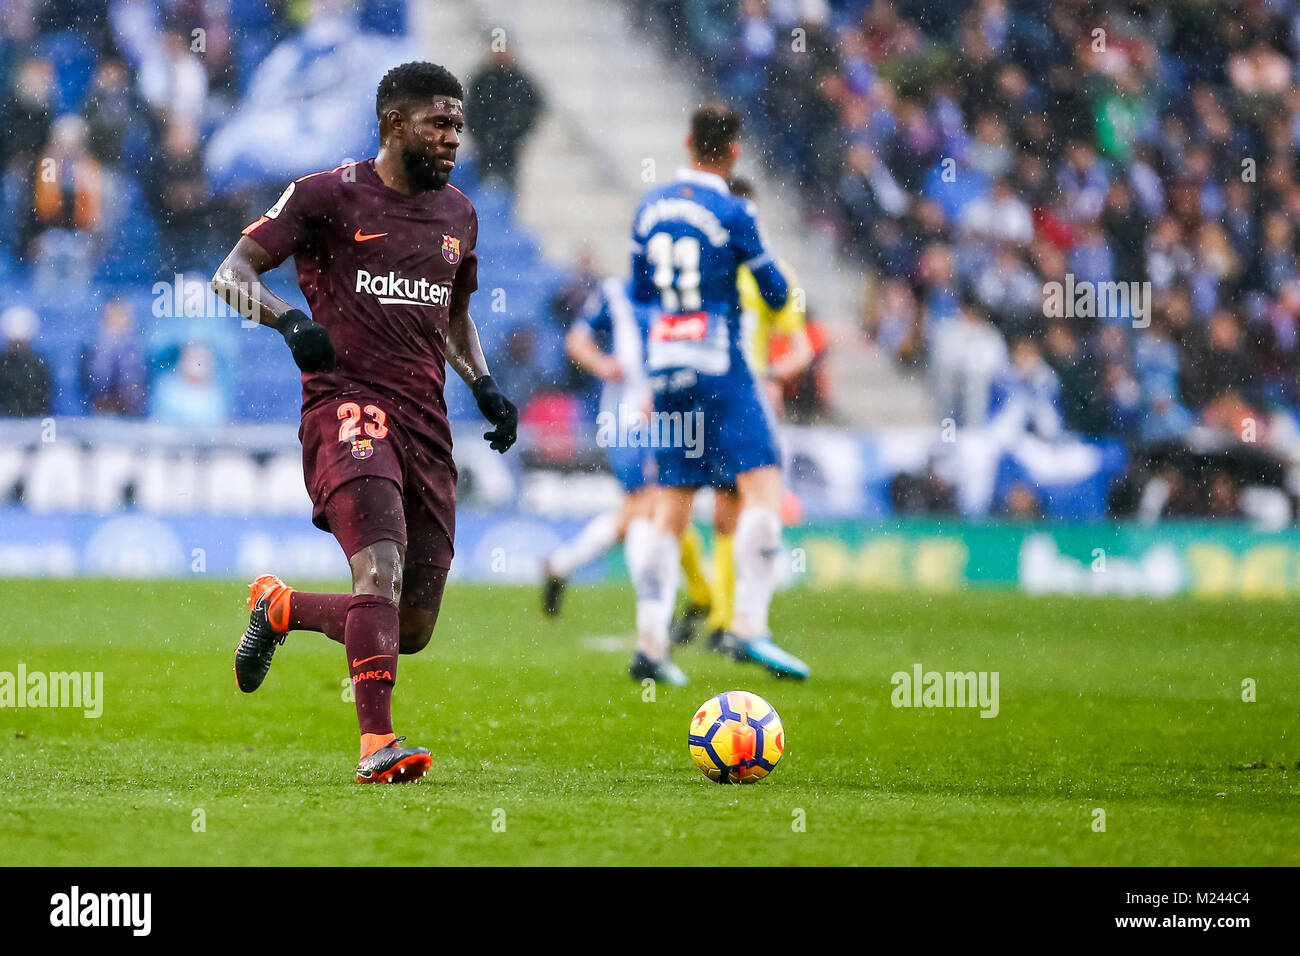 Barcelona, Spain. 04th Feb, 2018. FC Barcelona defender Samuel Umtiti (23) during the match between RCD Espanyol and FC Barcelona, for the round 22 of the Liga Santander, played at RCDE Stadium on 4th February 2018 in Barcelona, Spain. Credit: Gtres Información más Comuniación on line, S.L./Alamy Live News Stock Photo